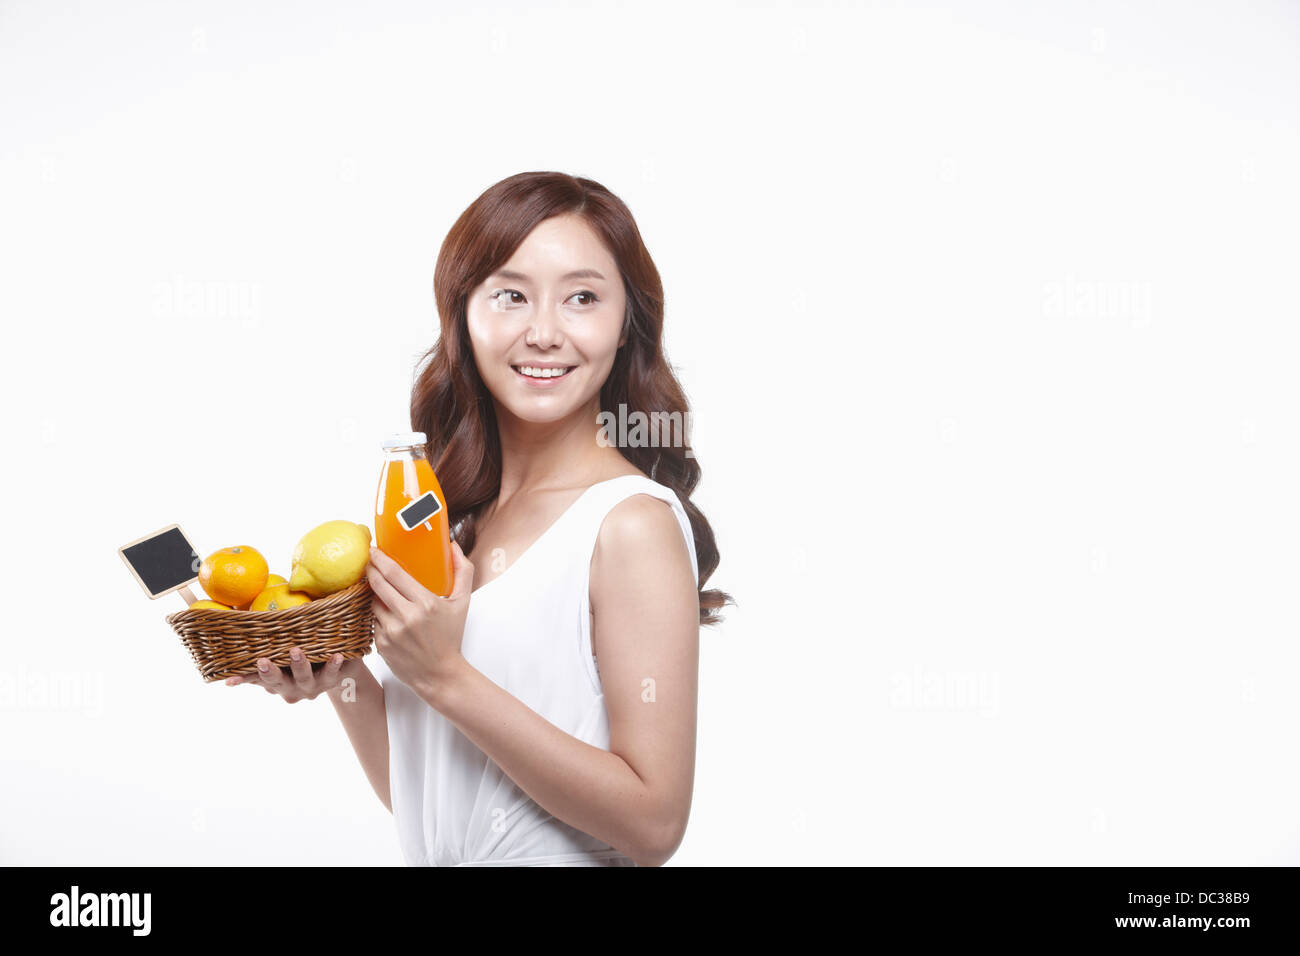 a lady in white dress holding a basket of fruits and a bottle of juice Stock Photo